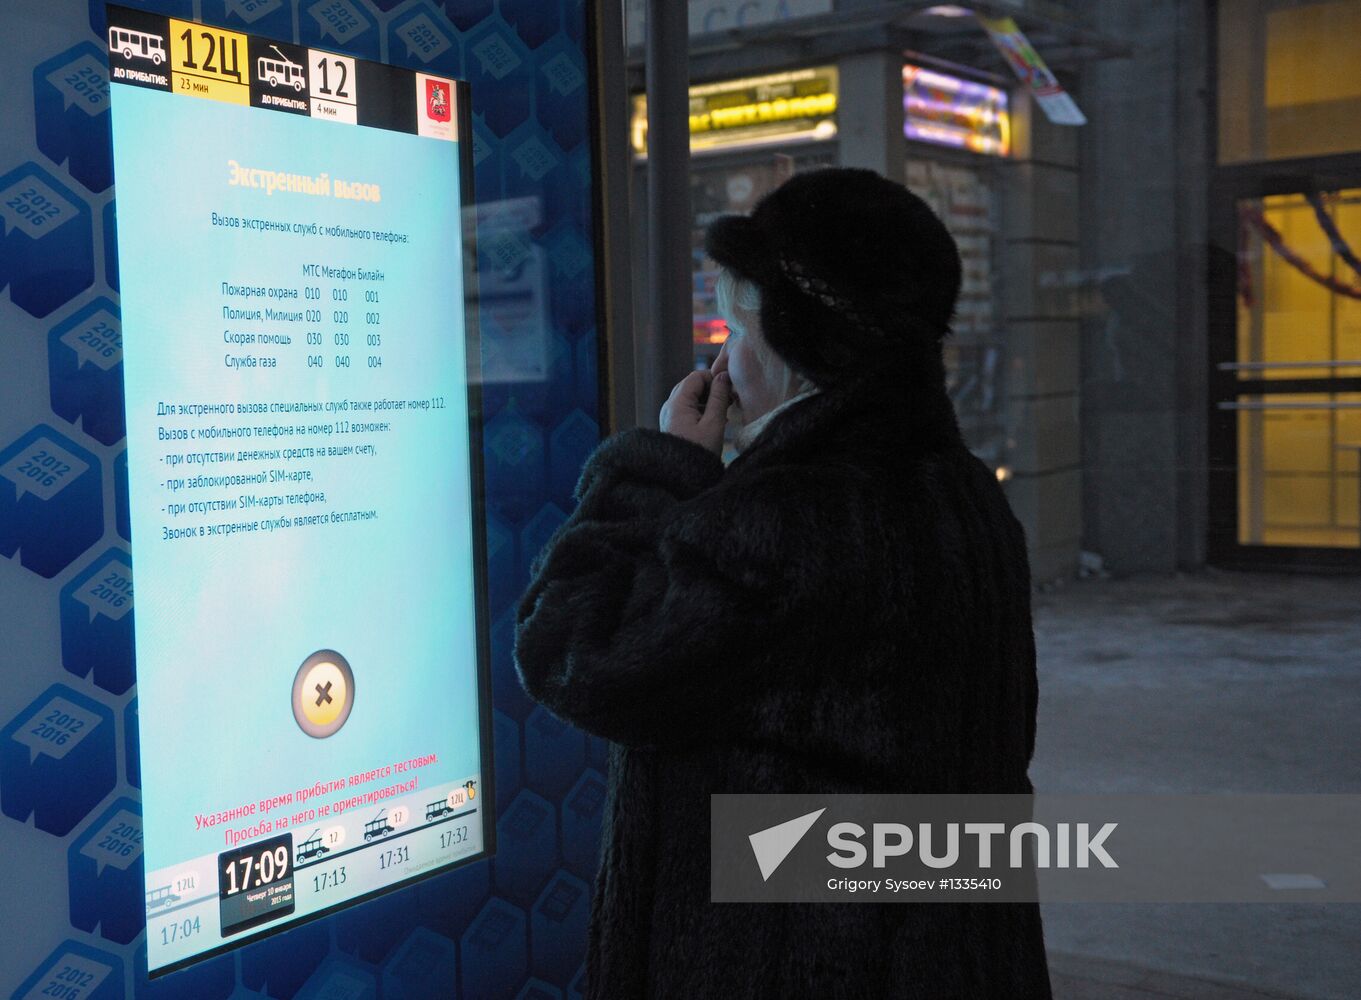 Work of "intellectual" public transport stops in Moscow